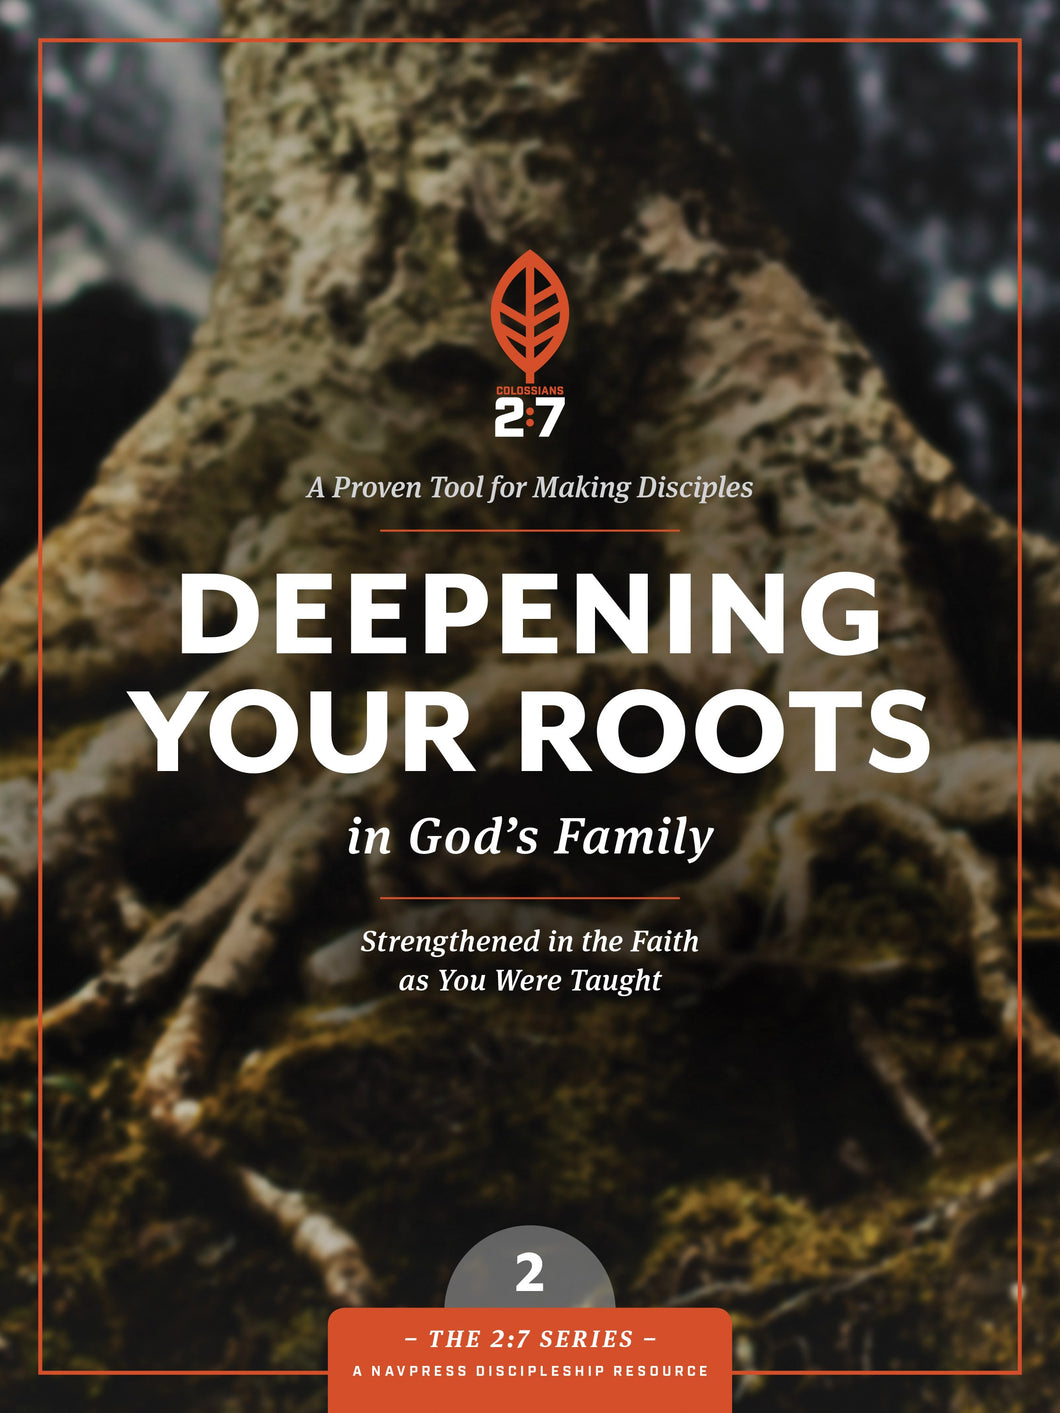 Deepening Your Roots In God's Family (2:7 Series V2)